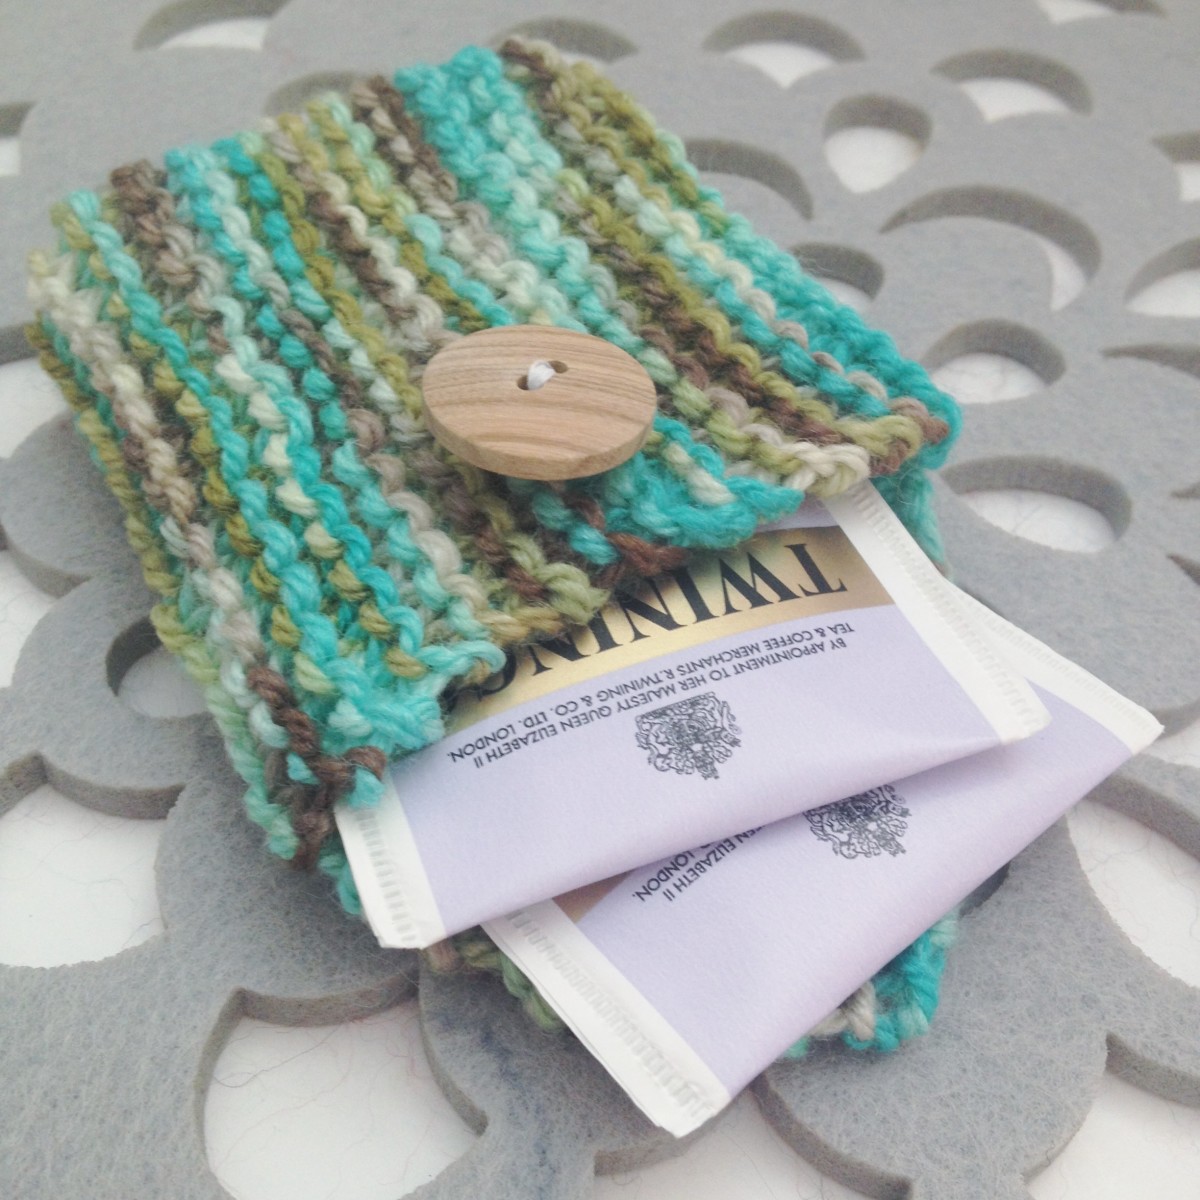 Cute knitted teabag caddy instructions